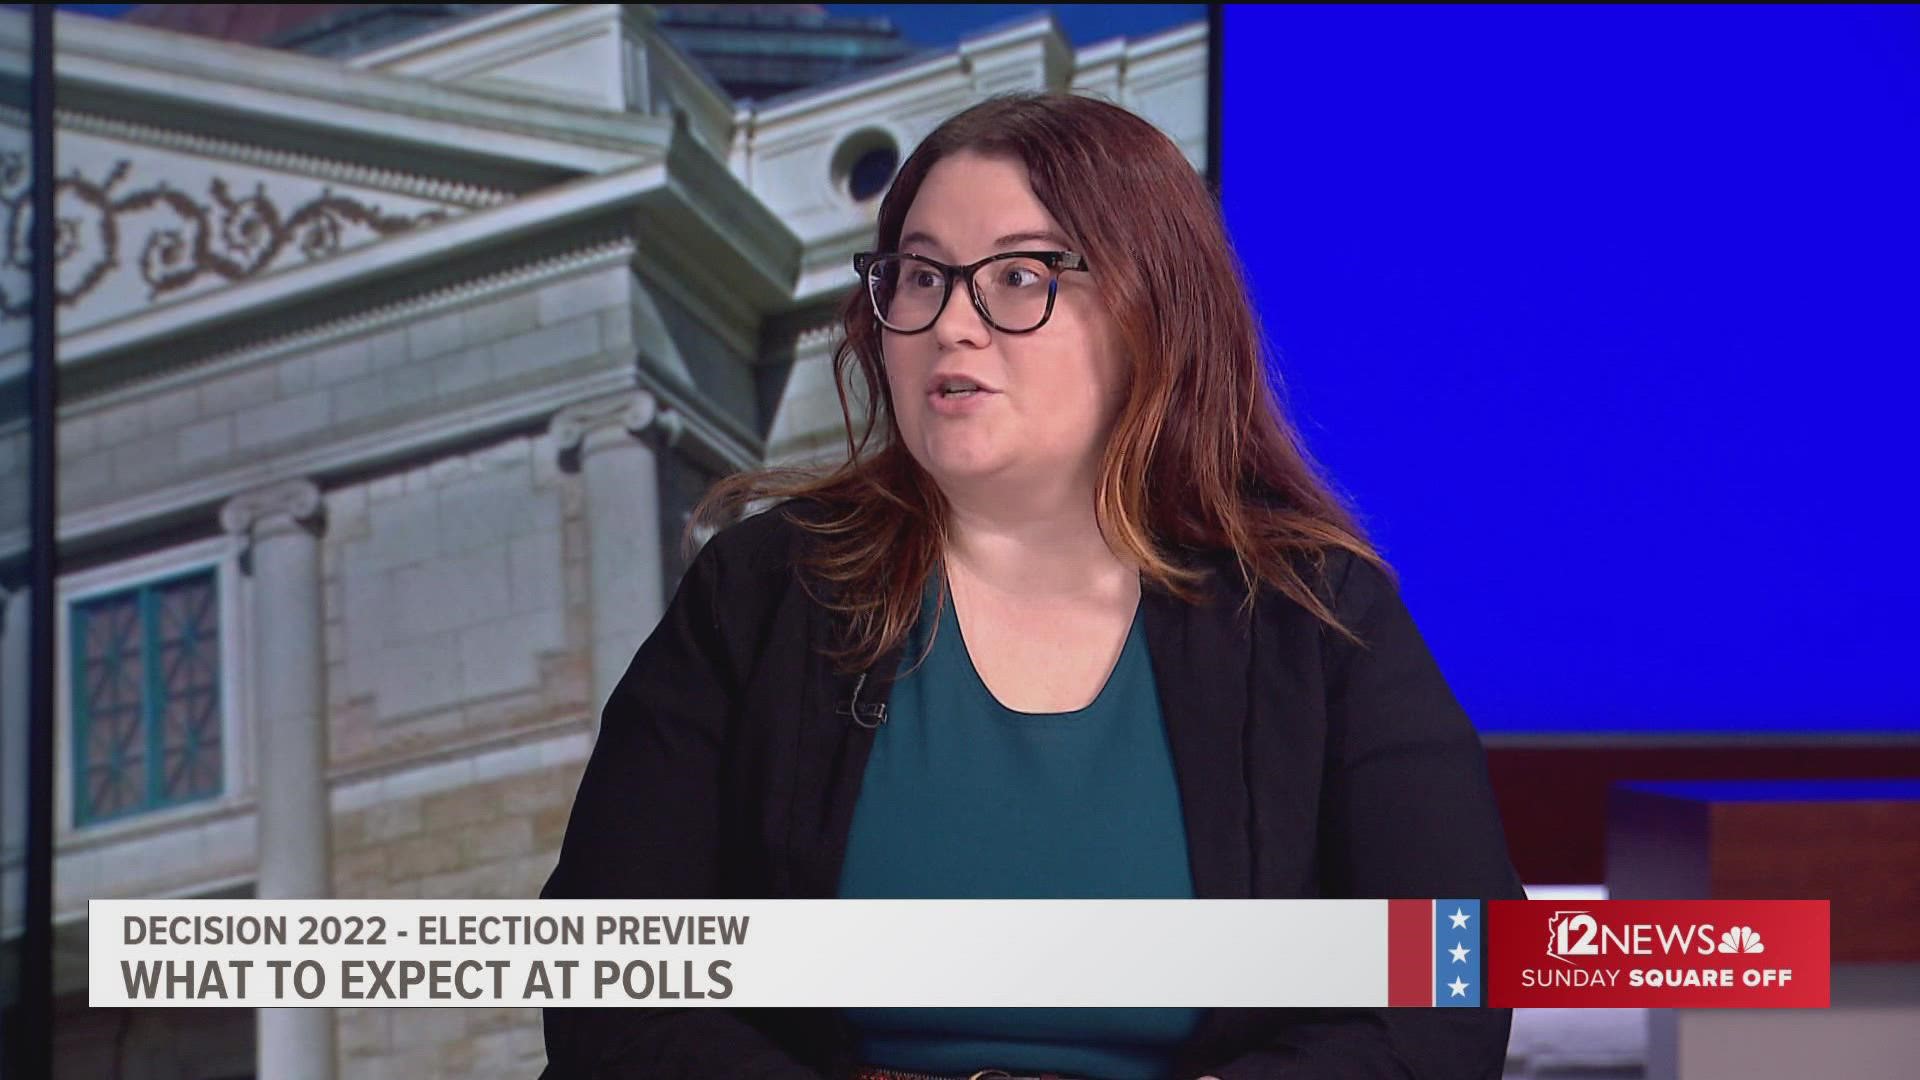 How are officials preparing for Tuesday's midterm and aftermath? Rachel Leingang of the Arizona Agenda tells us what to expect.